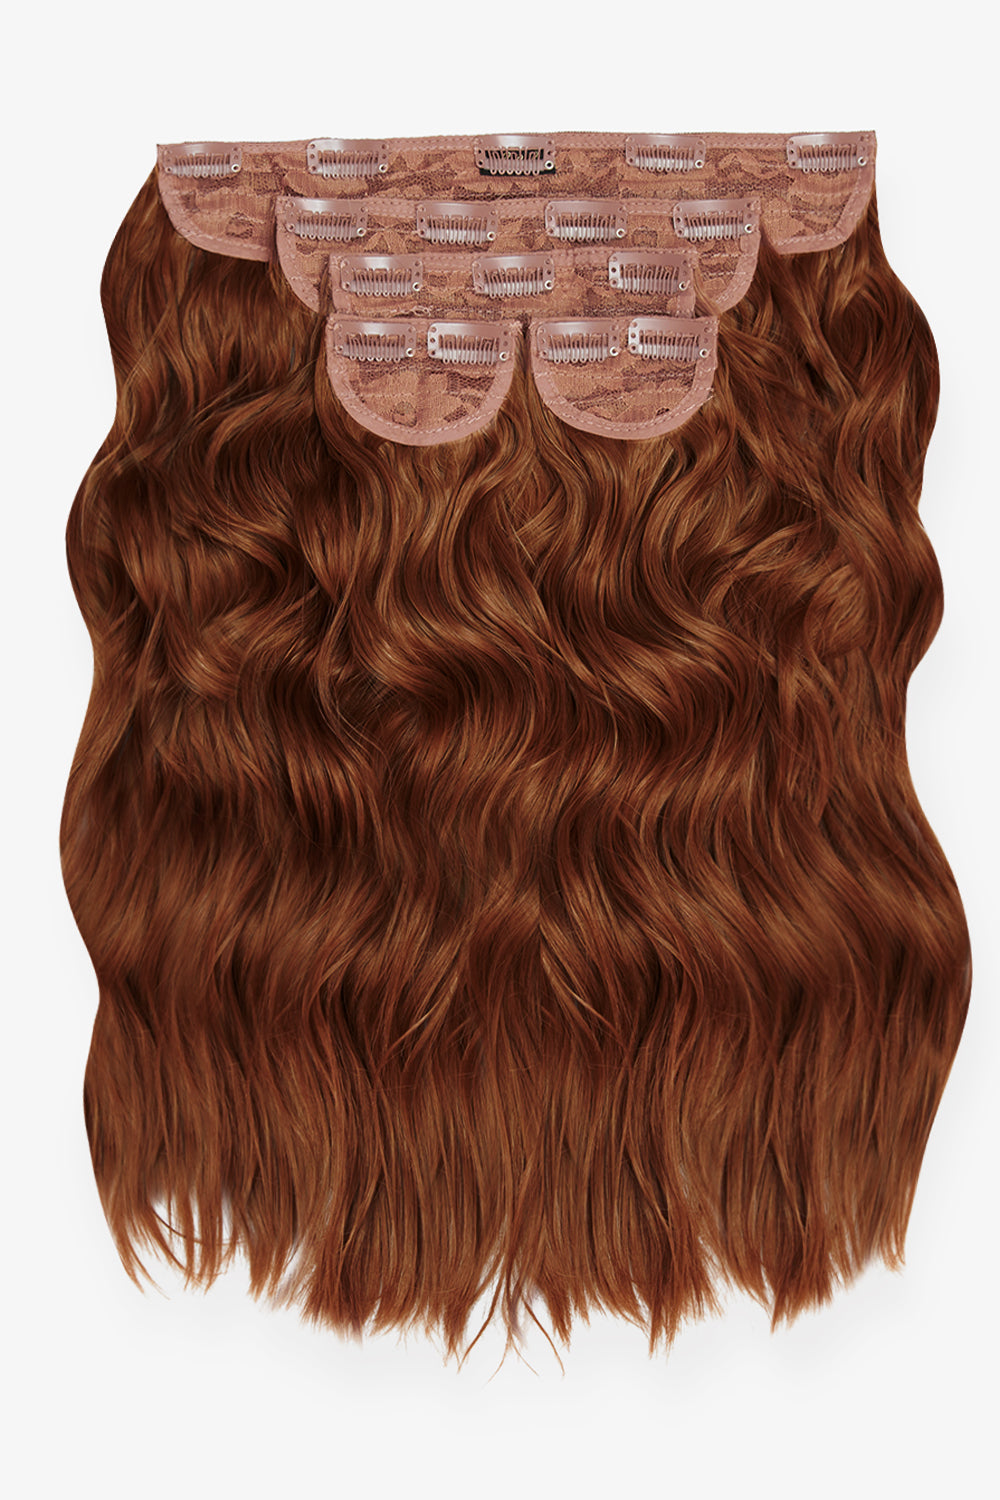 Super Thick 16’’ 5 Piece Brushed Out Wave Clip In Hair Extensions + Hair Care Bundle - Copper Red